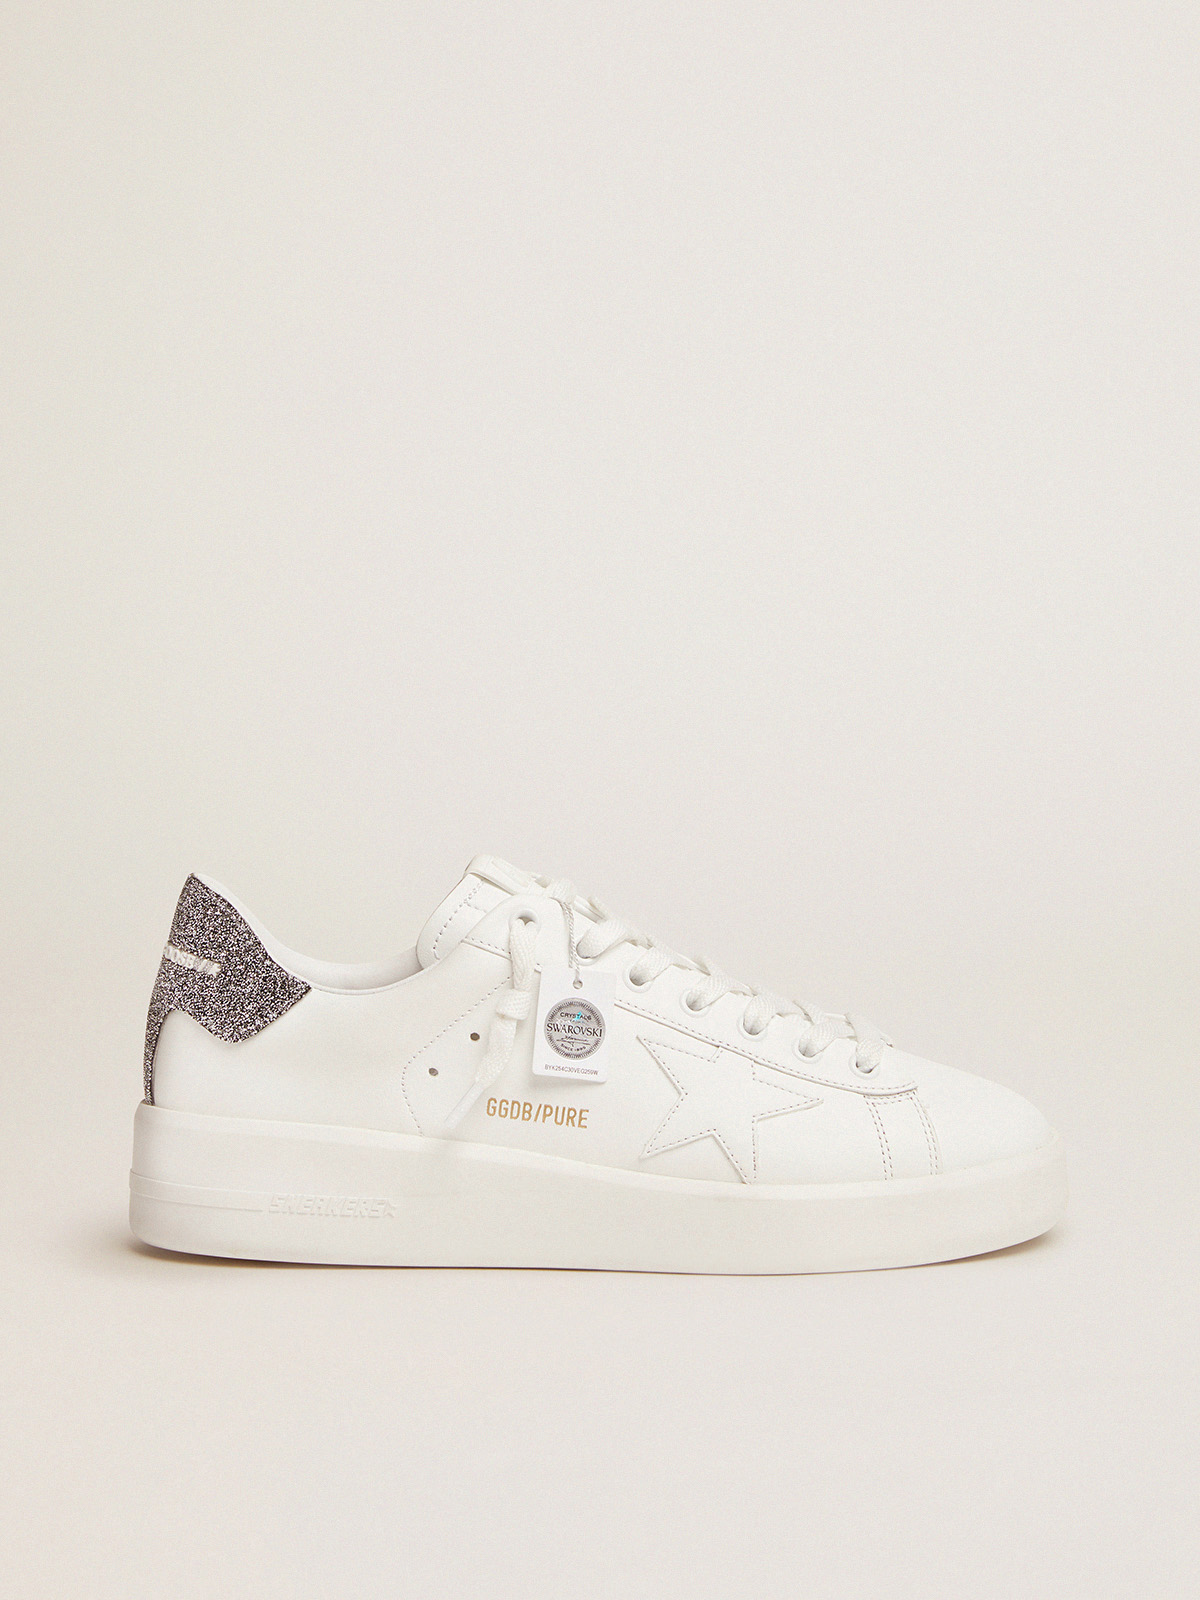 Purestar sneakers in white leather with silver Swarovski crystal heel tab |  Golden Goose